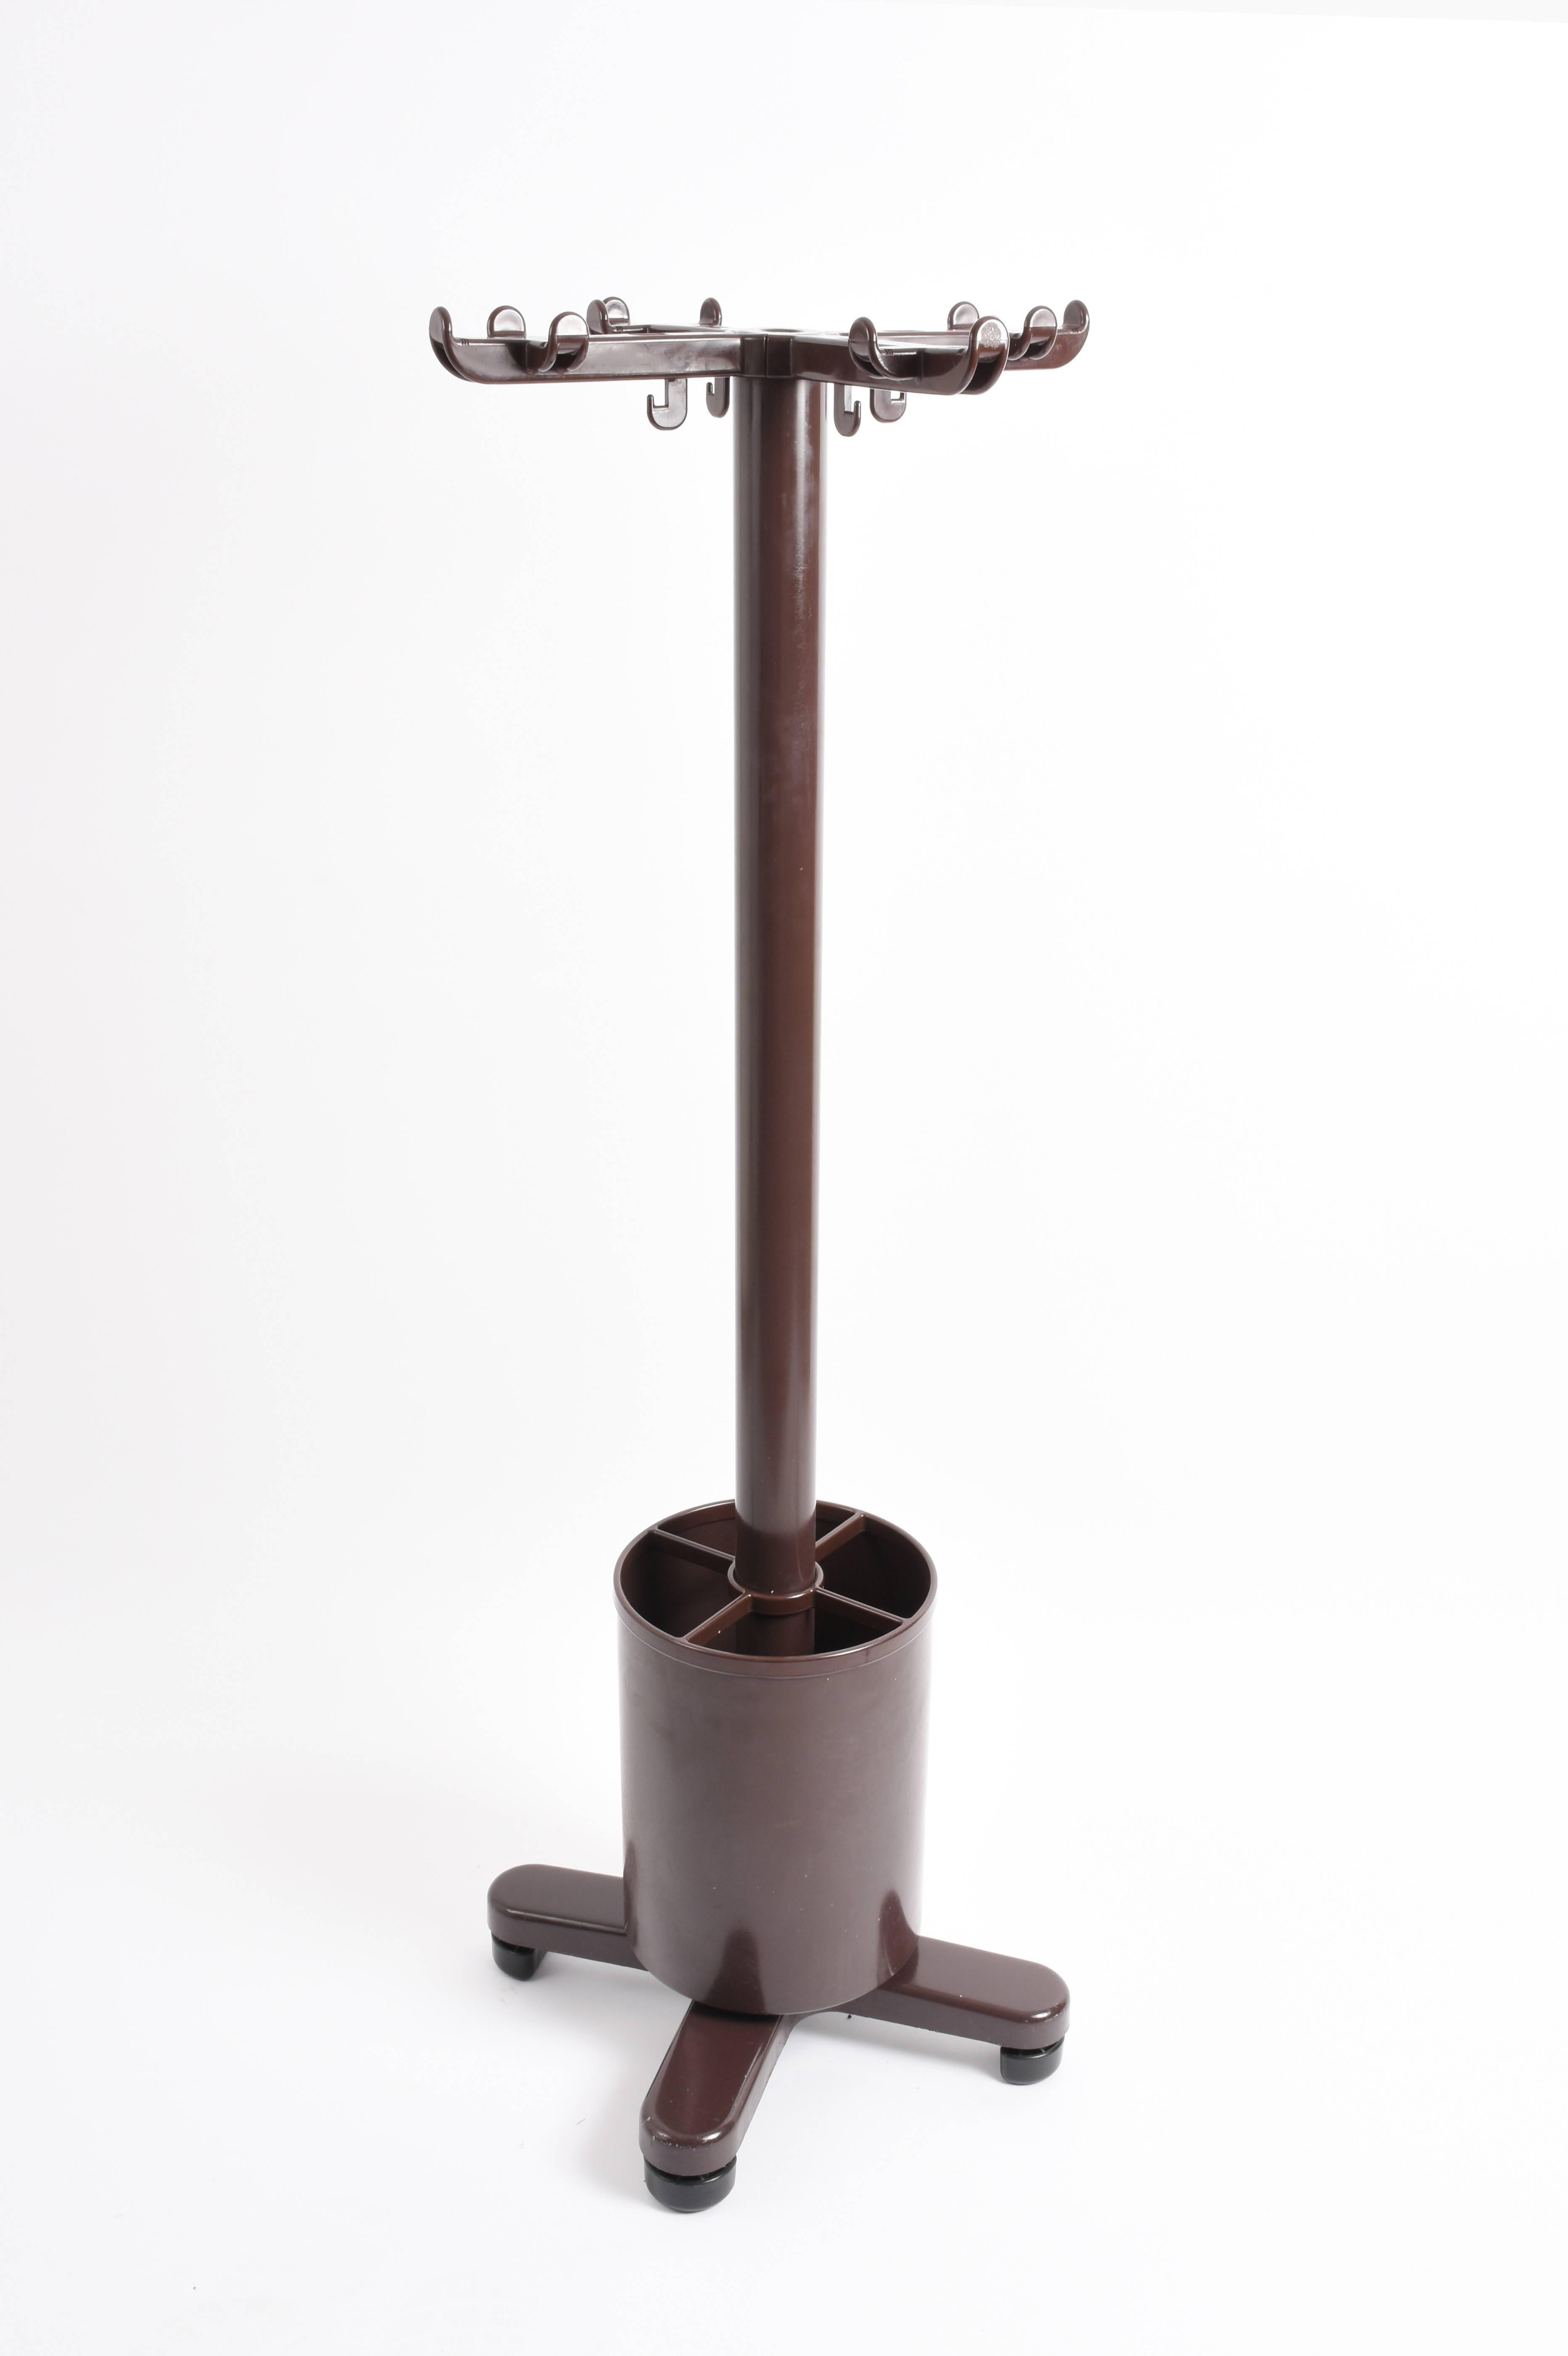 Coat rack / Brown umbrella stand designed by Ettore Sottsass Olivetti Synthesis 45 series, 1972.